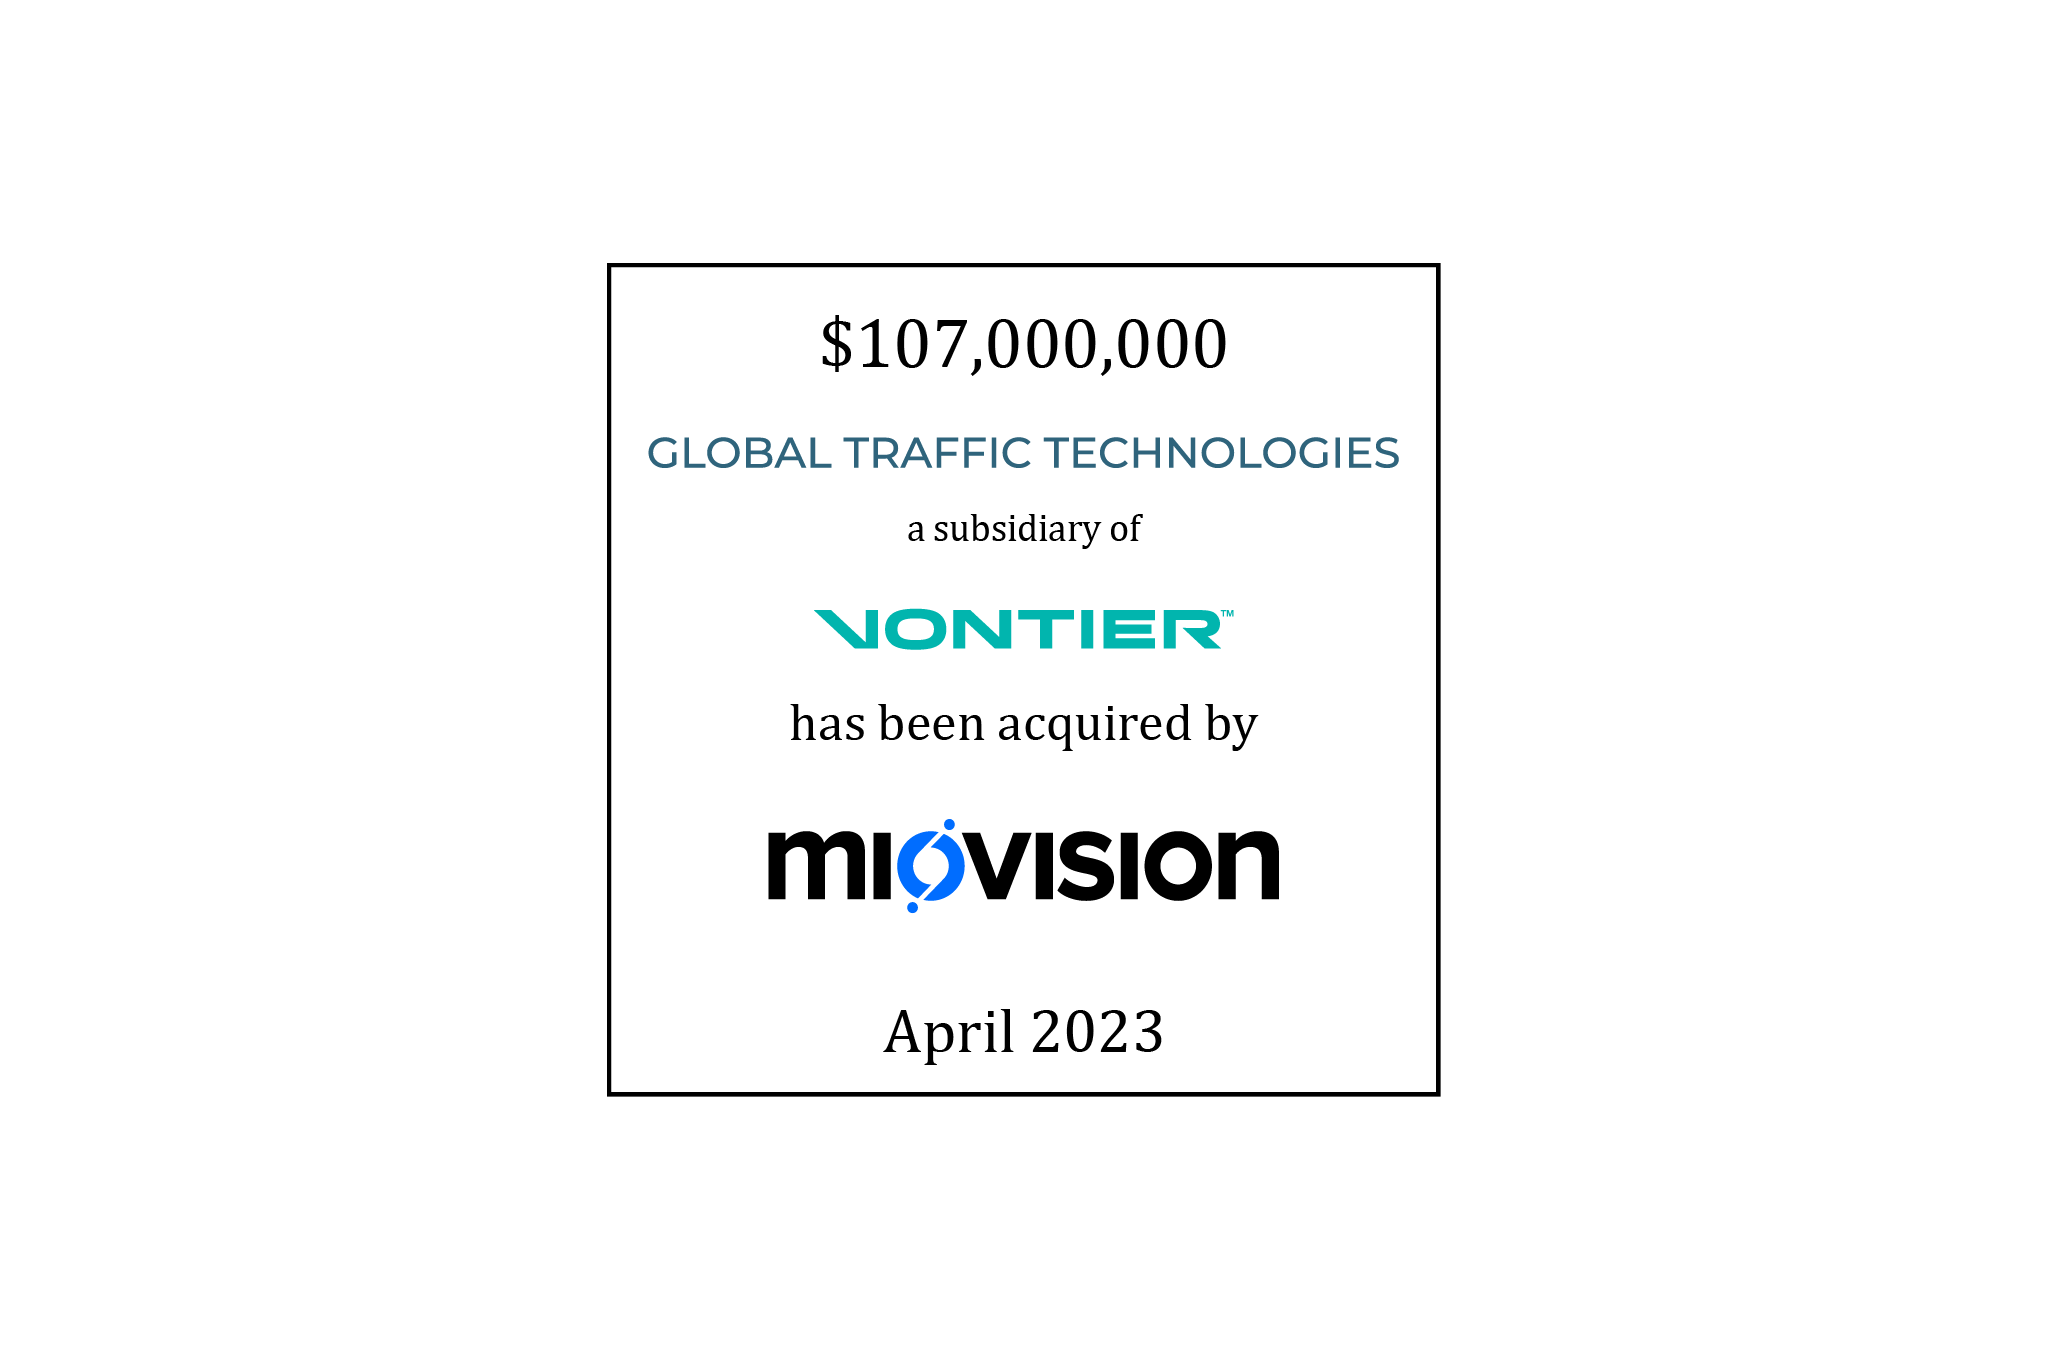 $107,000,000 | Global Traffic Technologies (logo), a subsidiary of Vontier (logo), Has Been Acquired by Miovision (logo) | April 2023